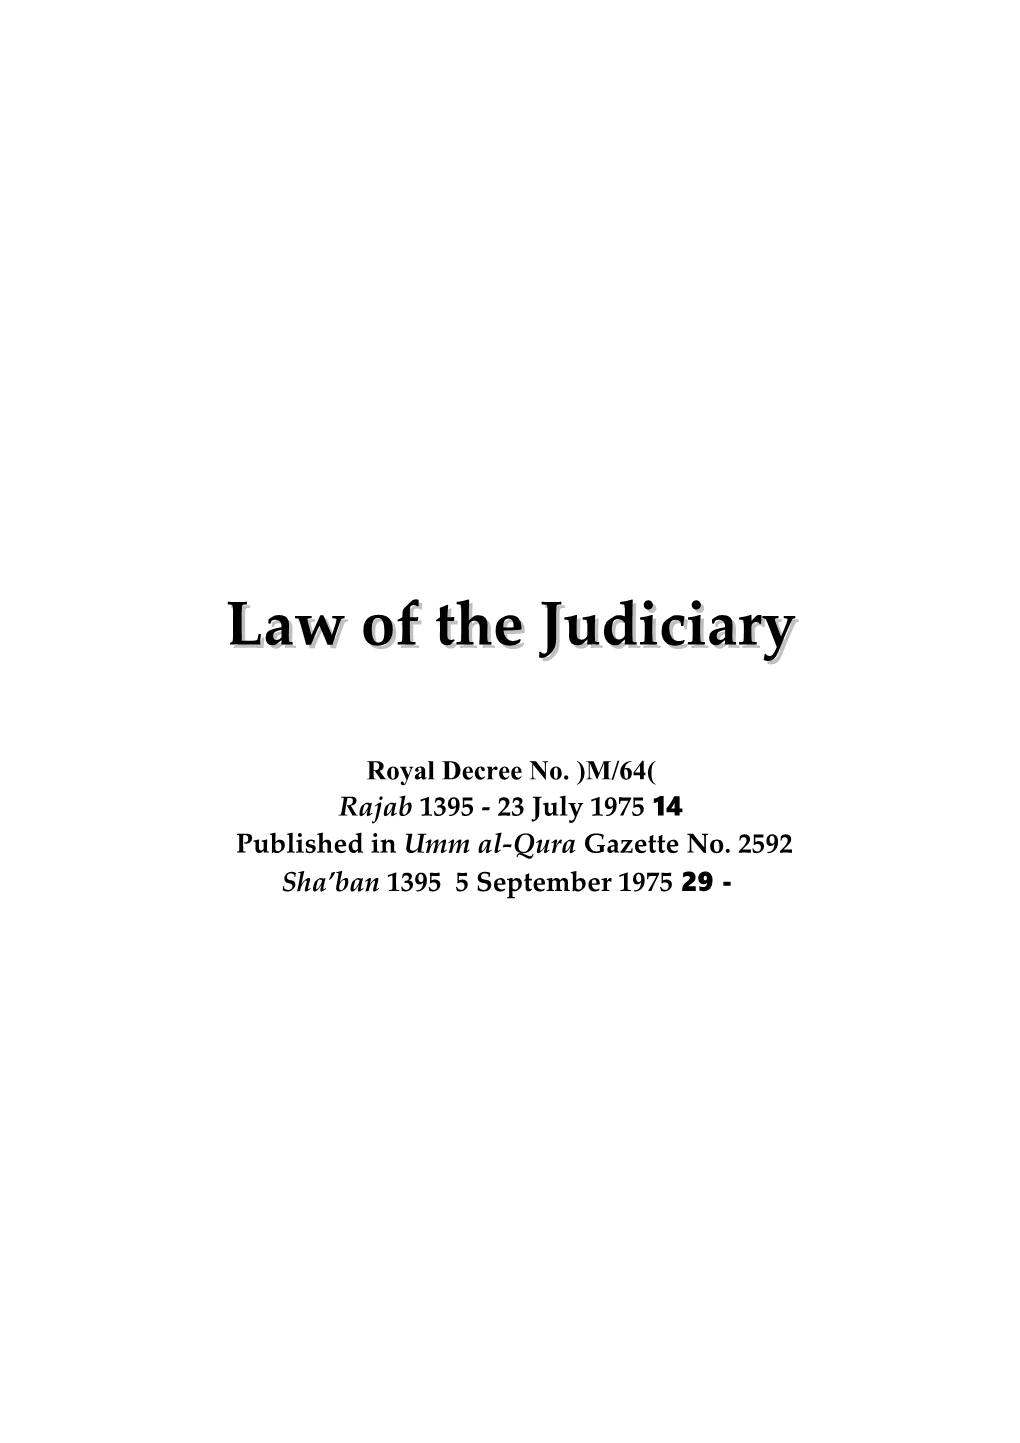 The Law of the JUDICIARY